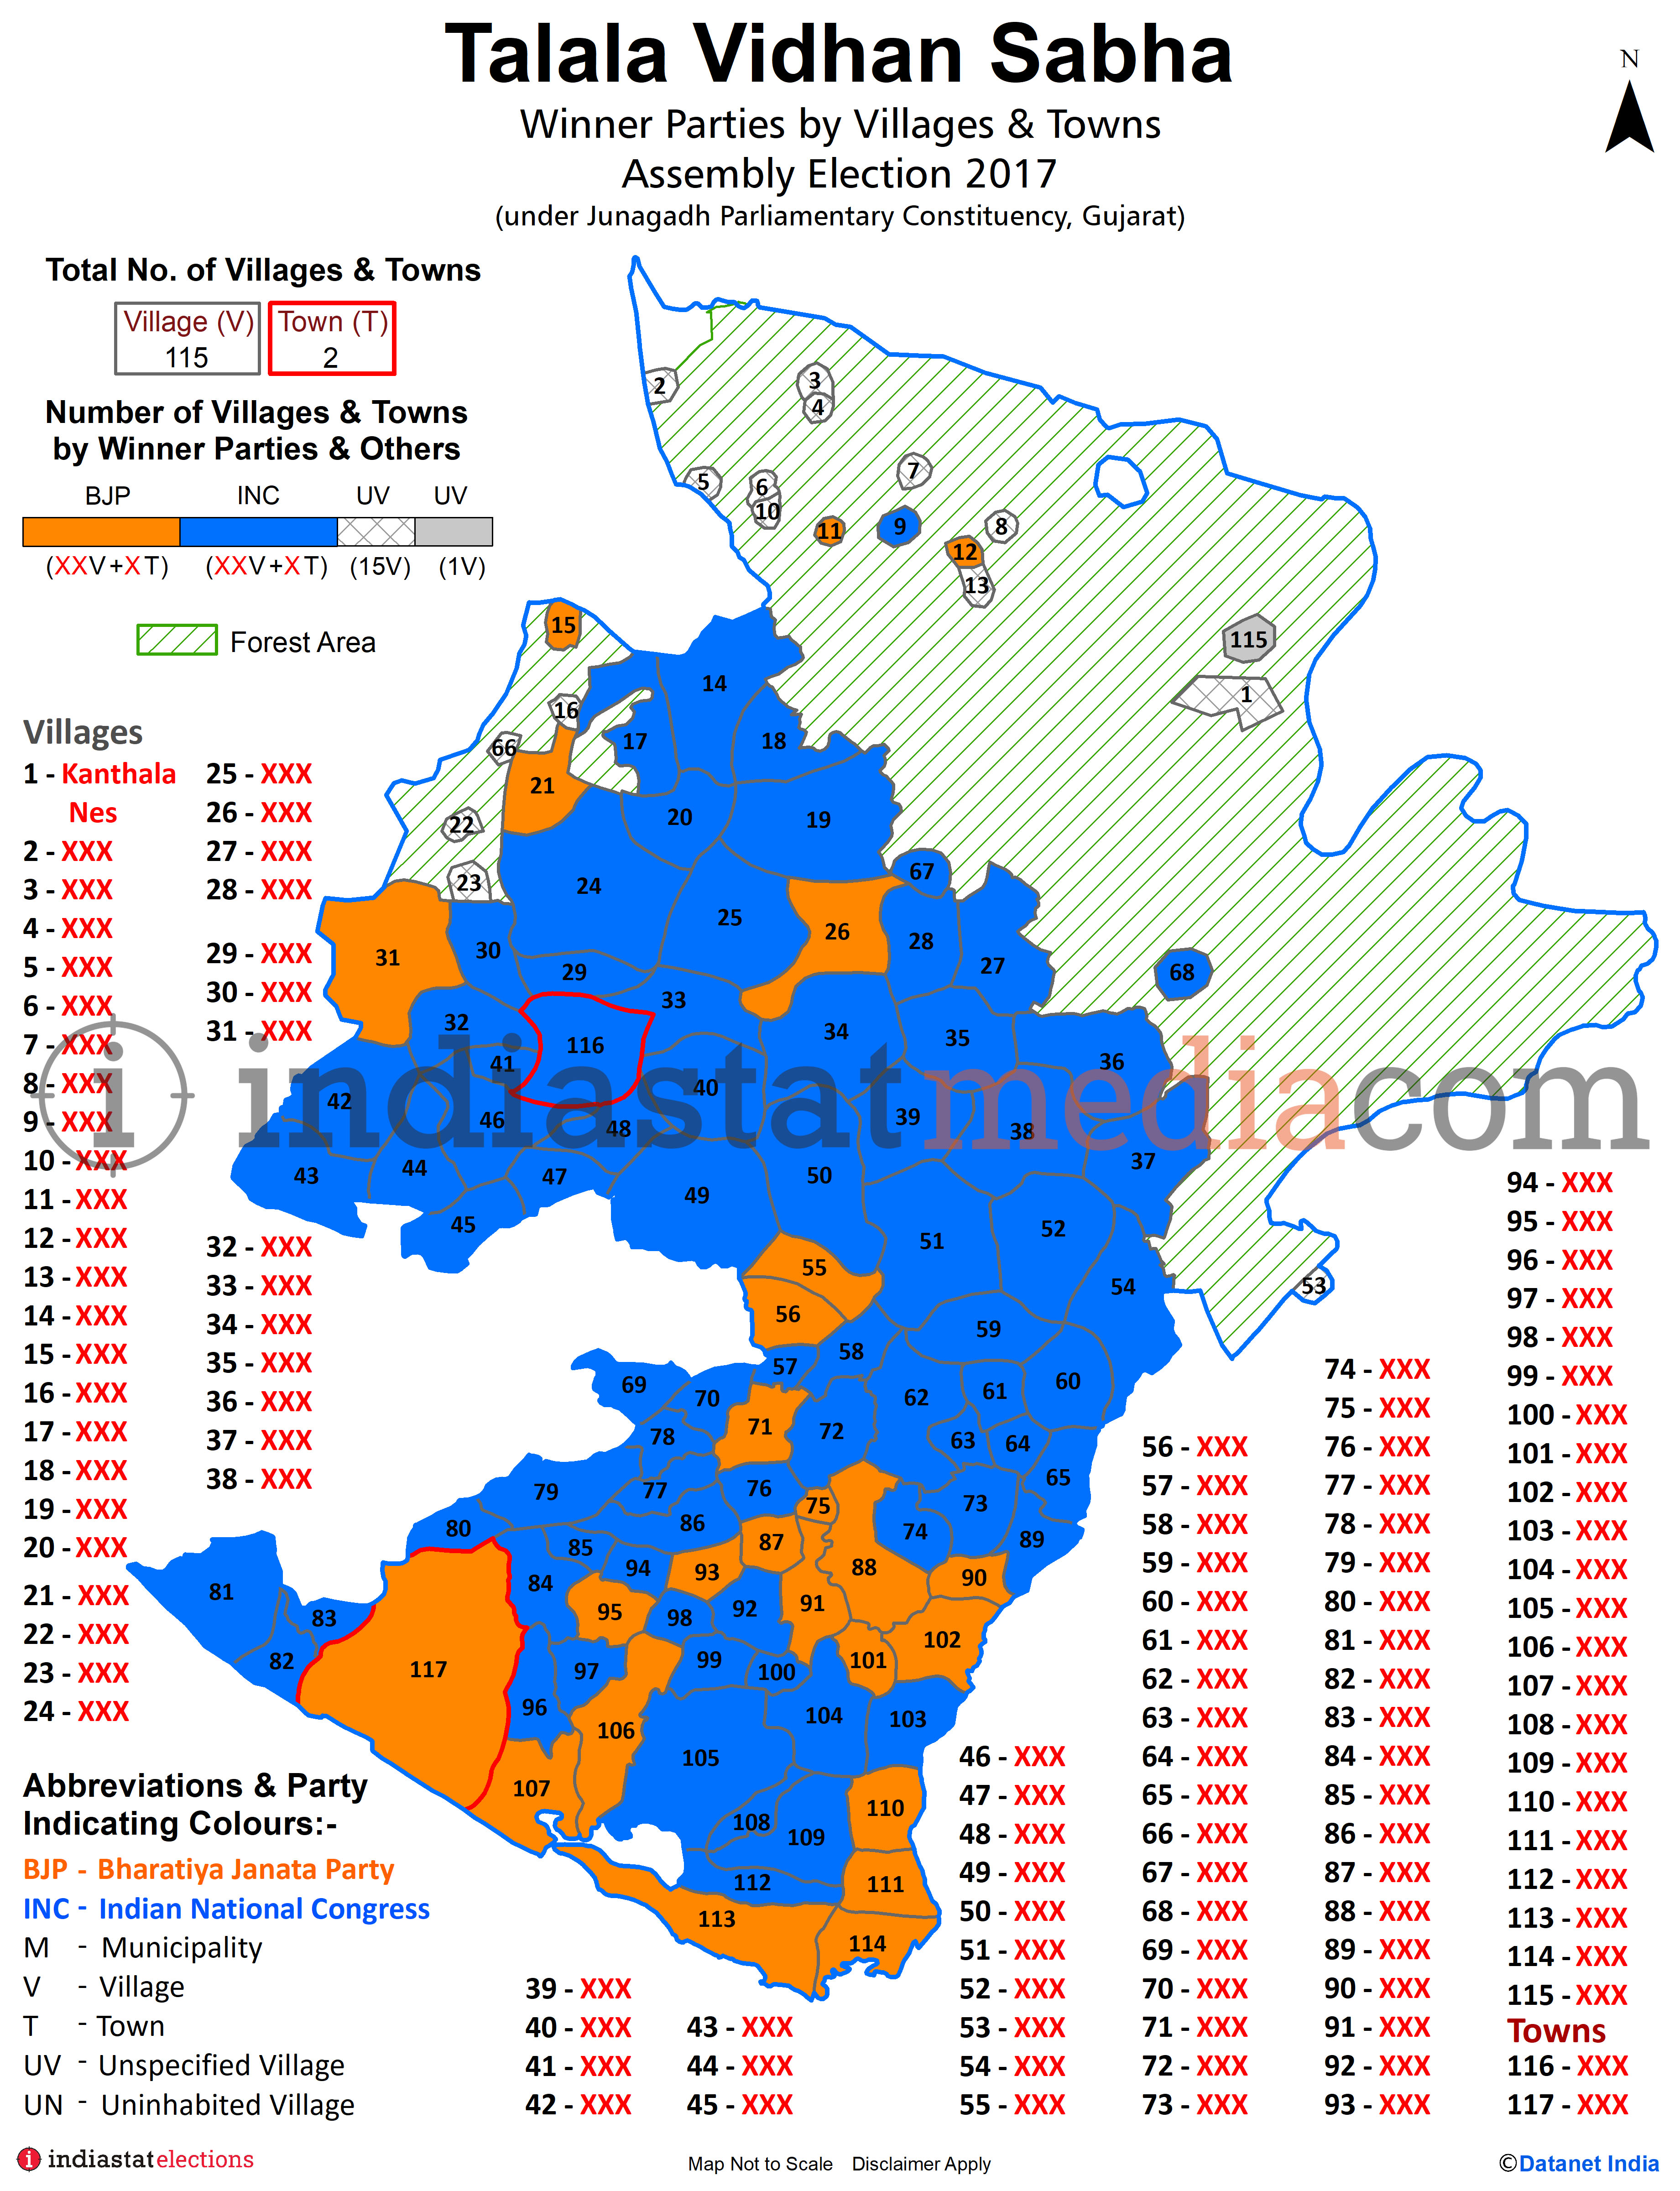 Winner Parties by Villages and Towns in Talala Assembly Constituency under Junagadh Parliamentary Constituency in Gujarat (Assembly Election - 2017)